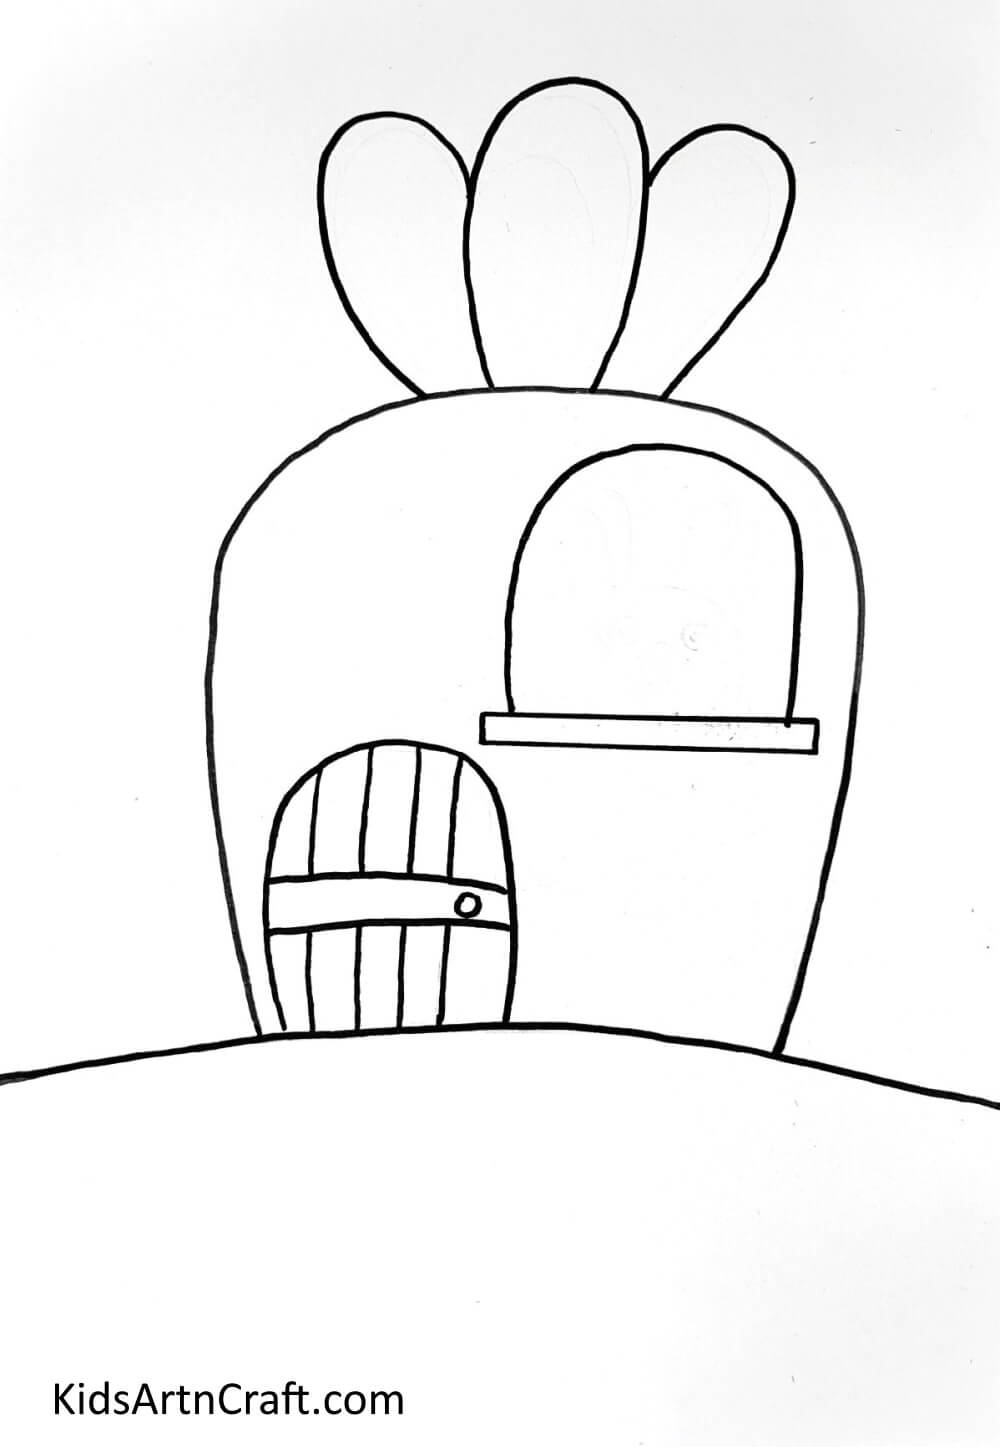 Drawing The Bunny House - Learn to Sketch a Rabbit Home Quickly with this Guide